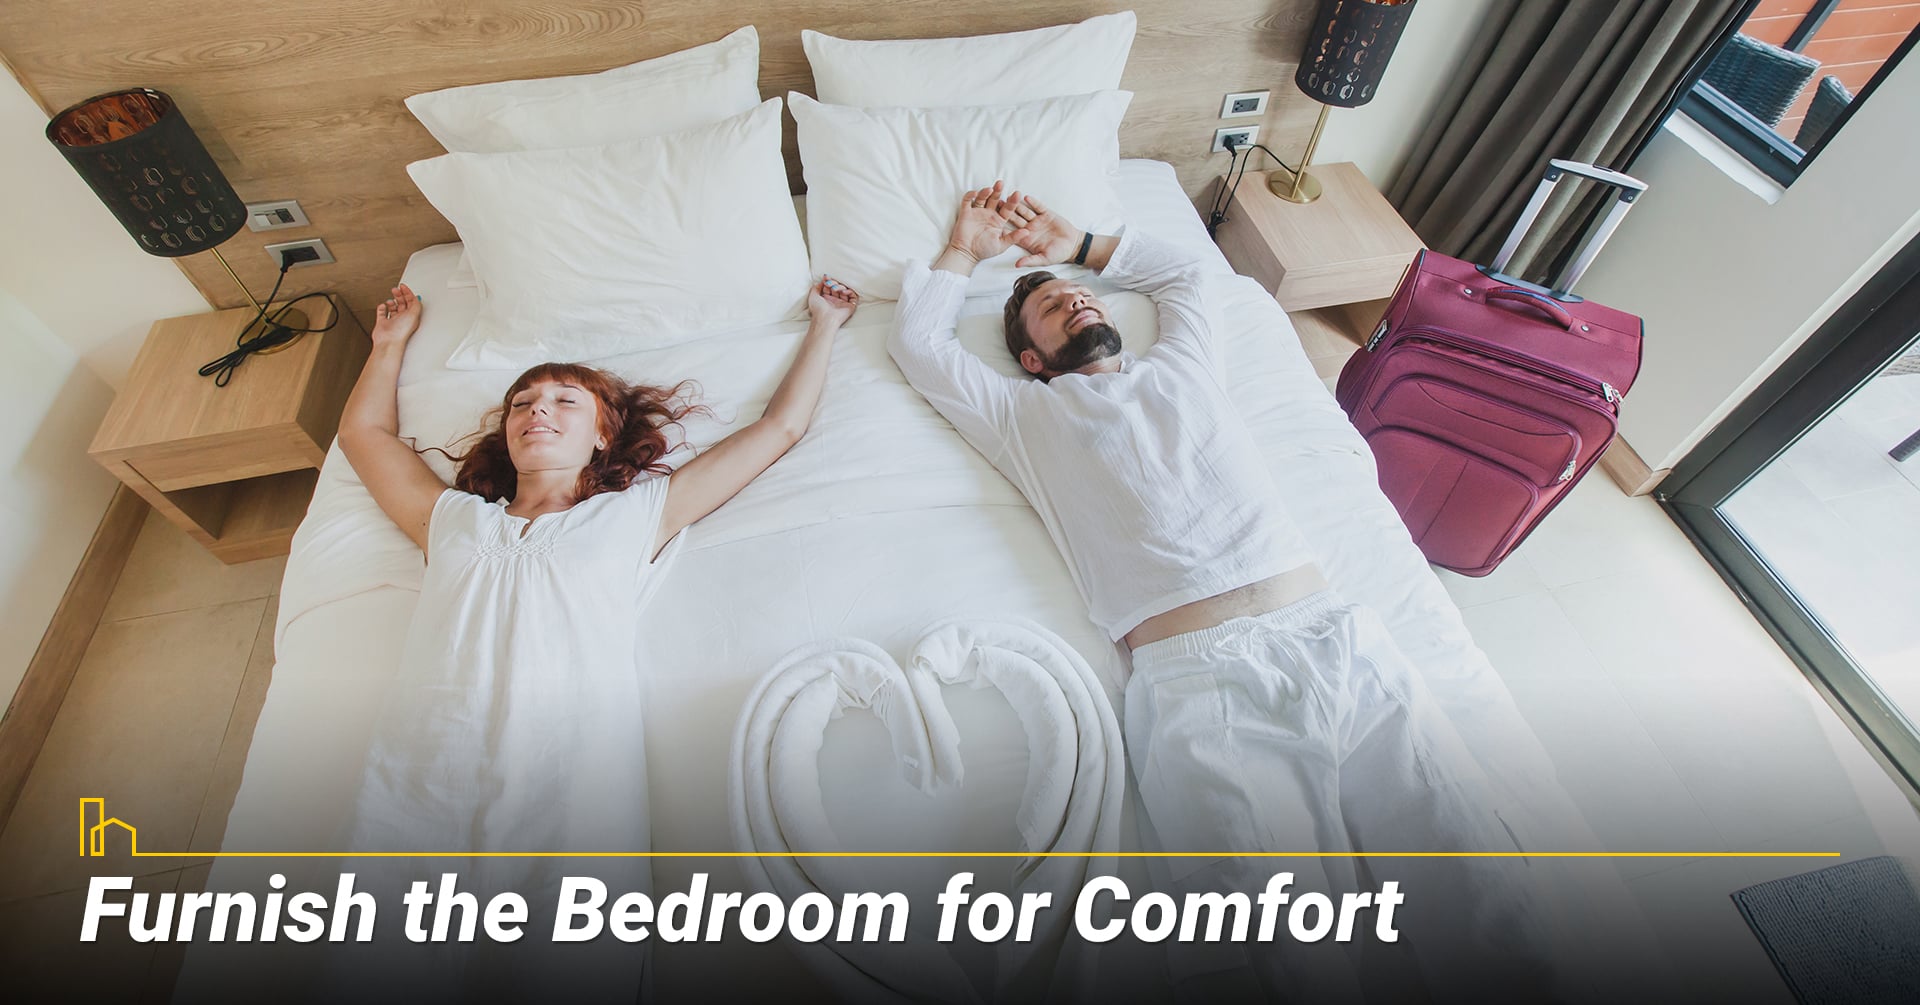 Furnish the Bedroom for Comfort